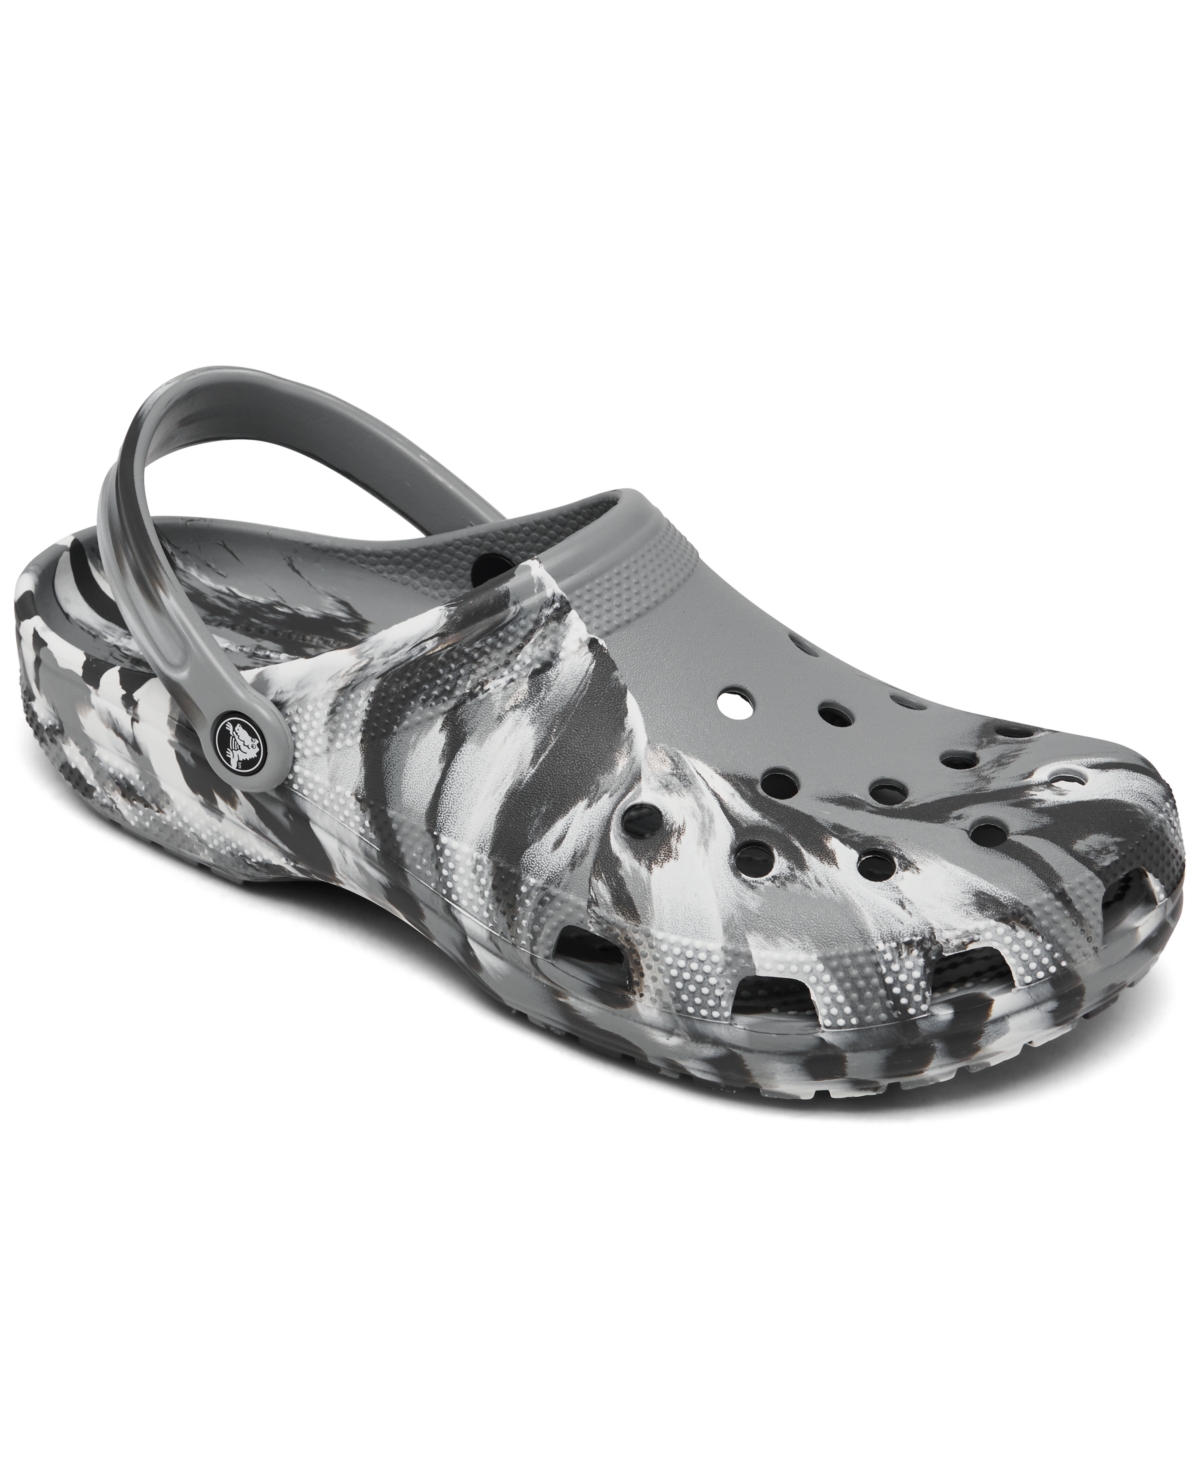 Men's Marbled Classic Clogs from Finish Line - White, Gray